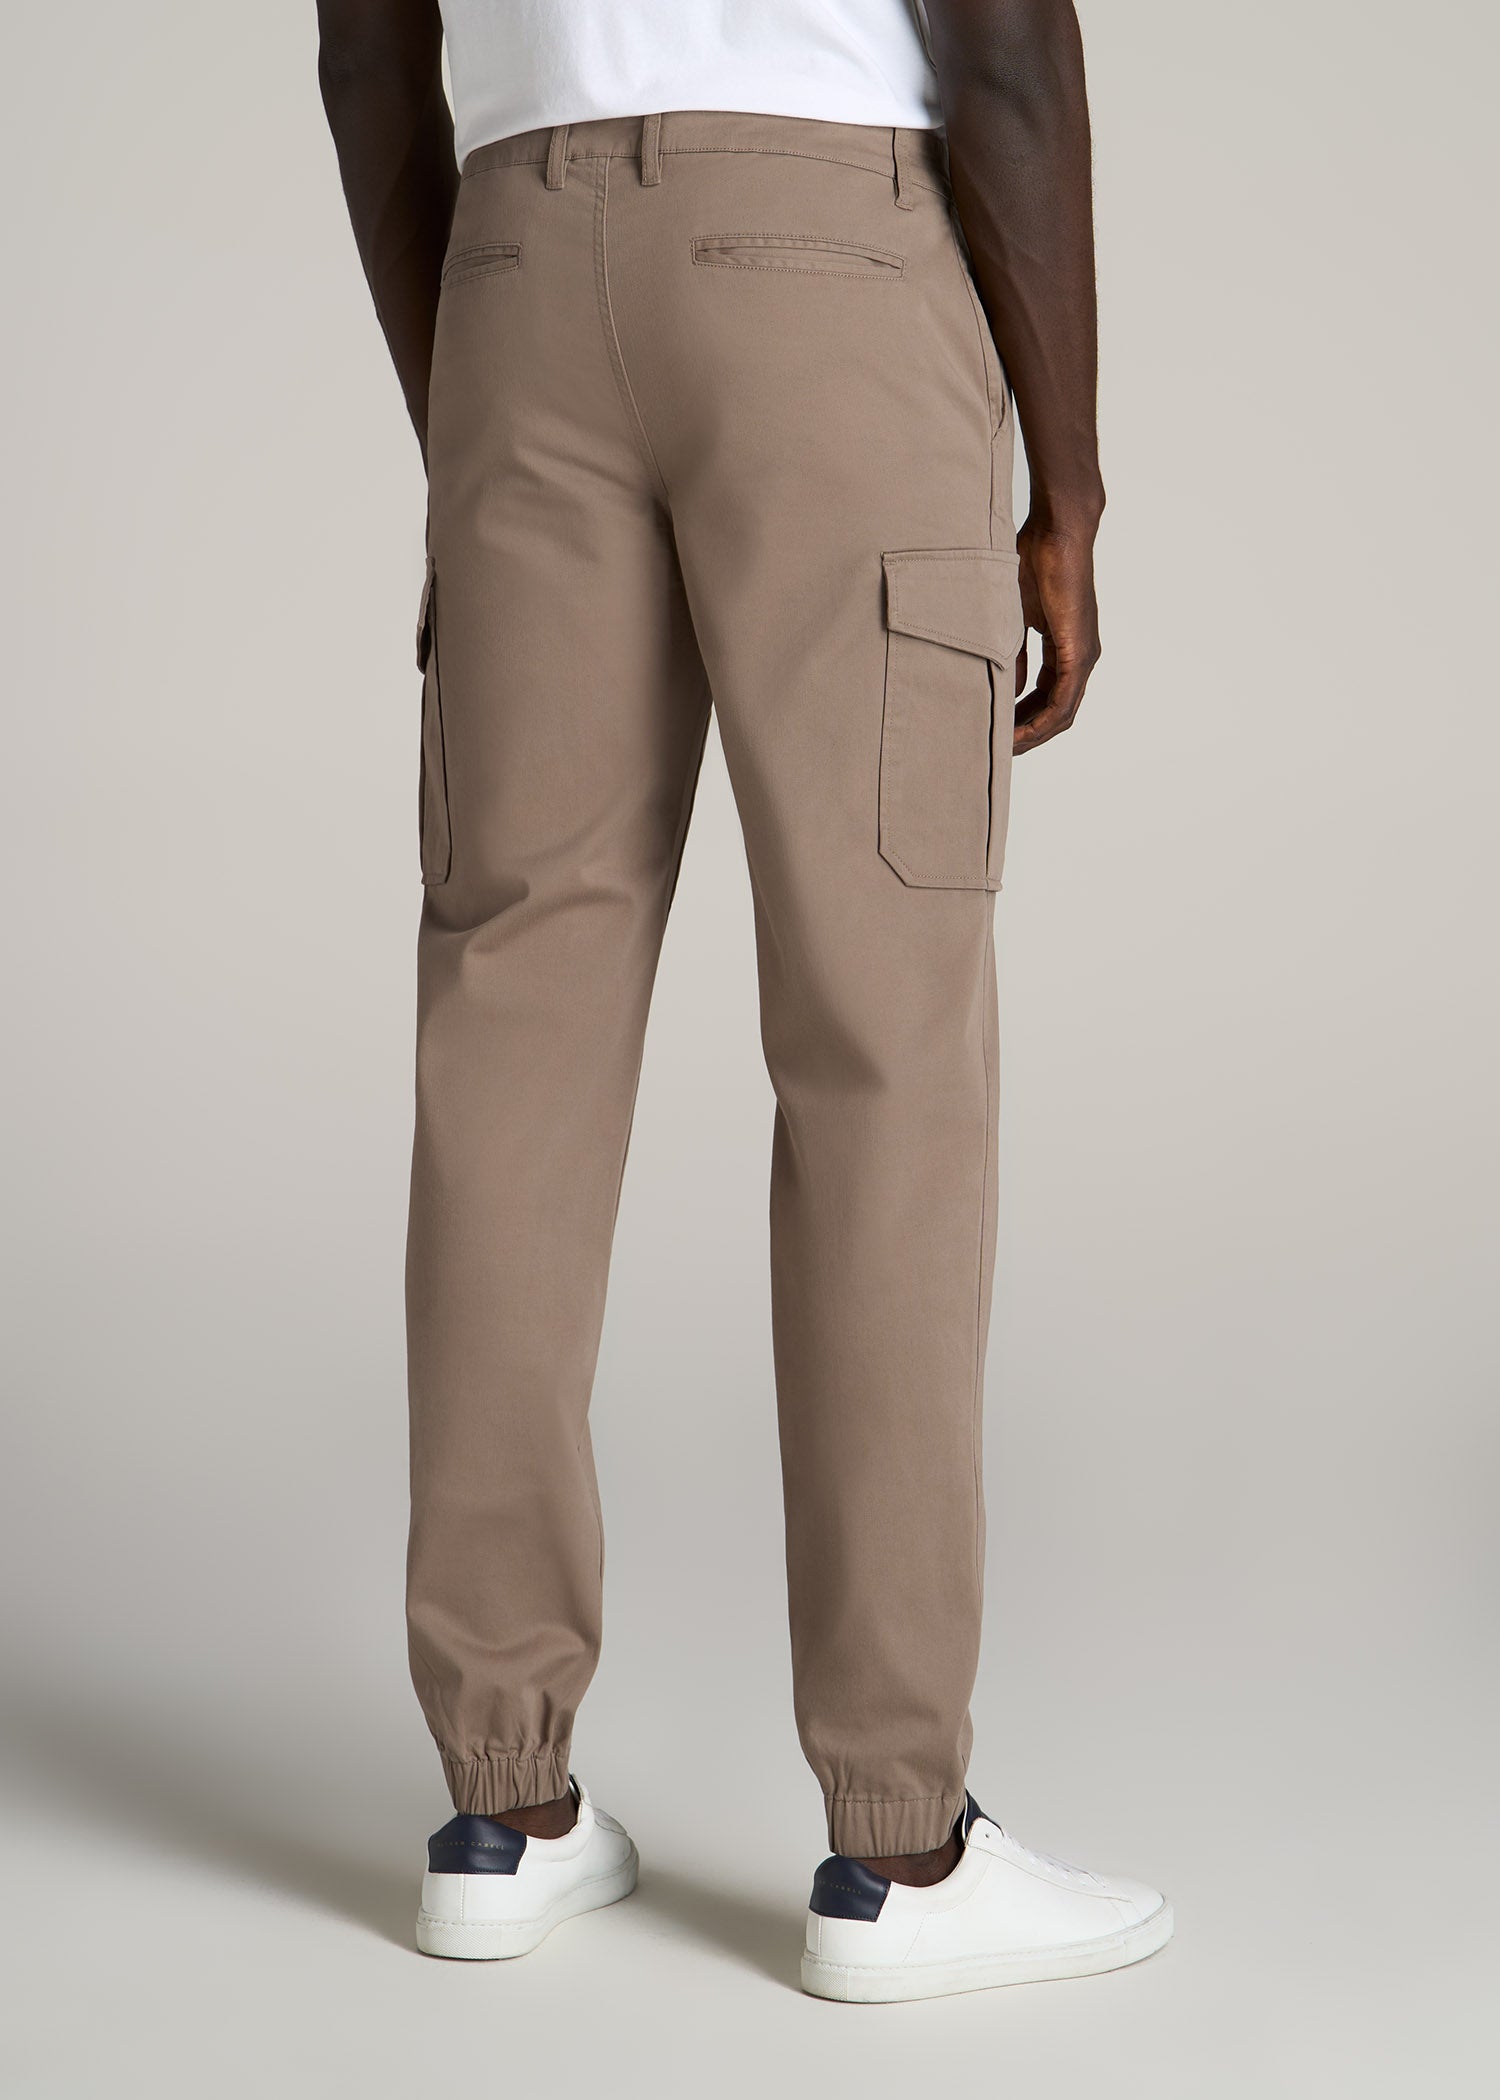 Khaki Derby Jeans Community Twill Cotton Lycra Solid Slim Tapered Men's  Trouser at best price in Chennai